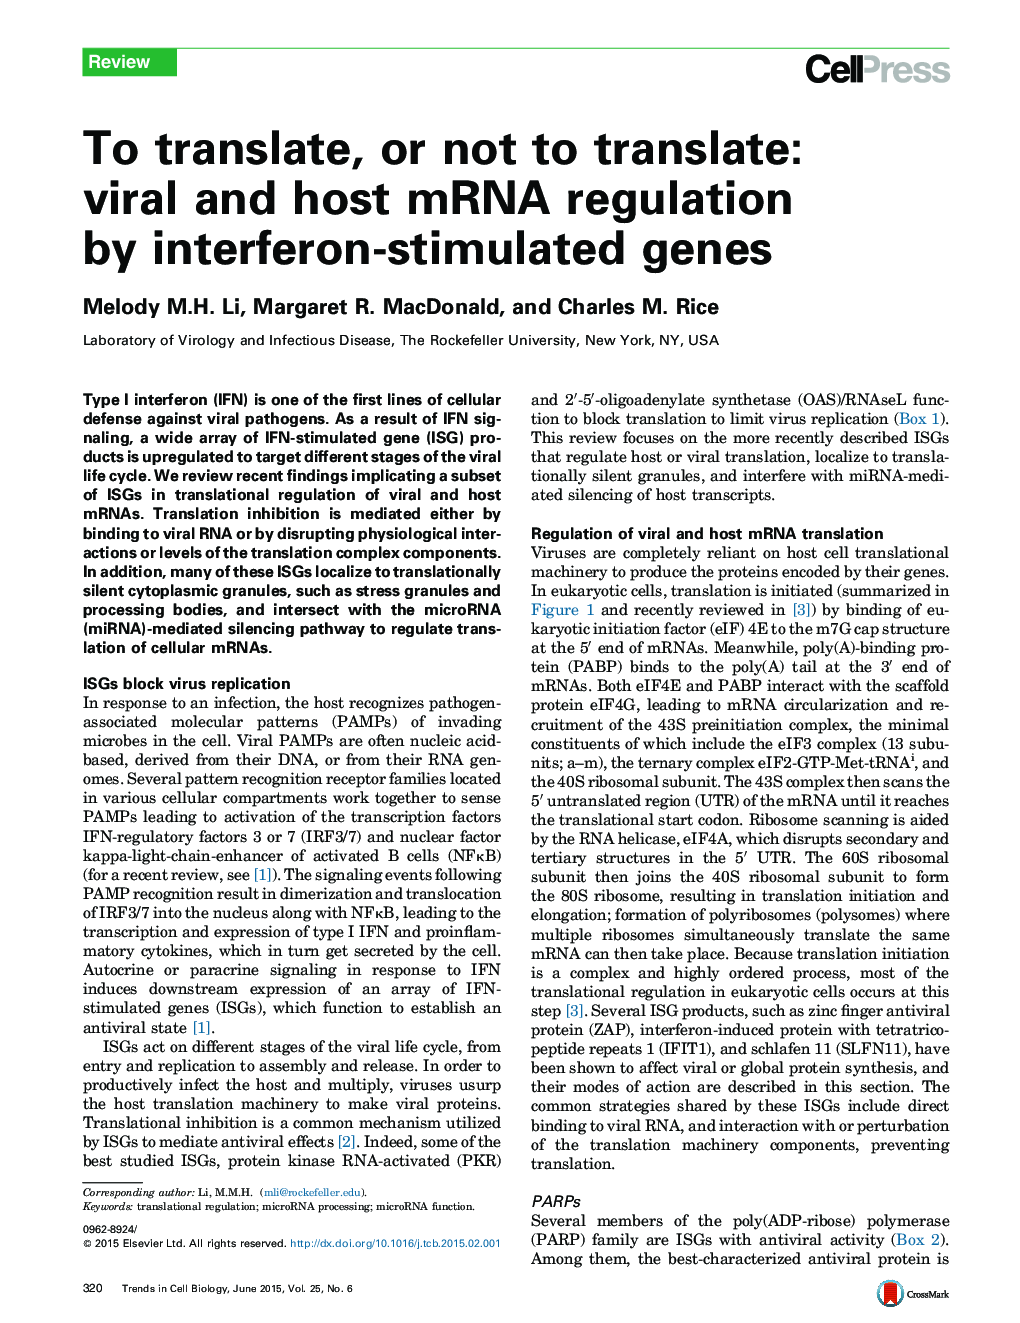 To translate, or not to translate: viral and host mRNA regulation by interferon-stimulated genes